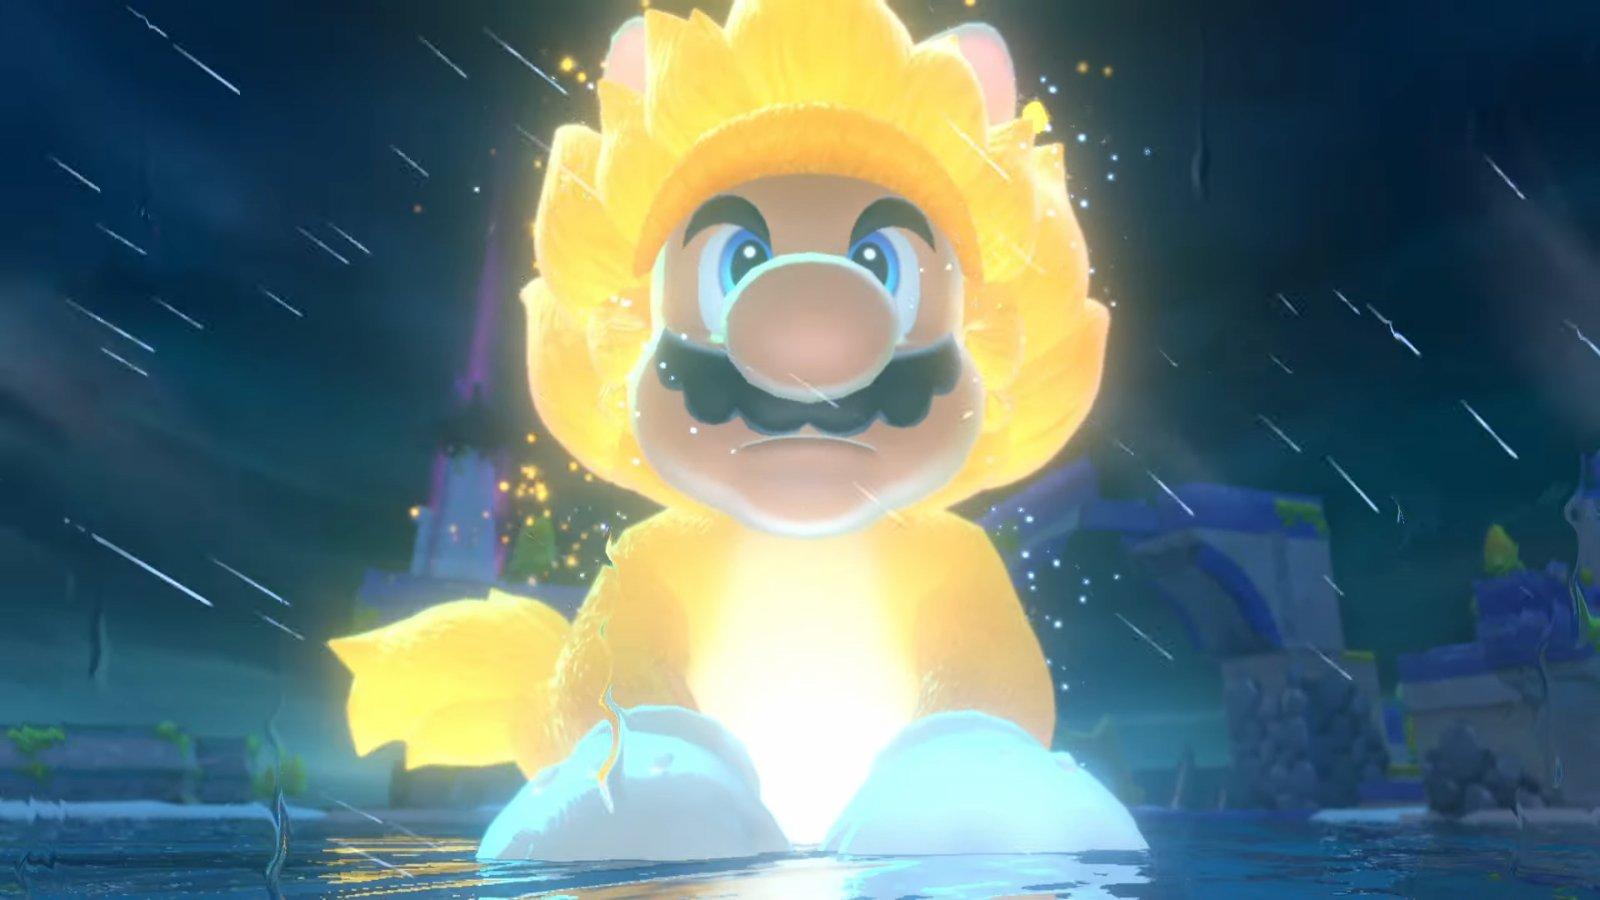 Super Mario 3D World + Bowser's Fury Coming To Switch In February